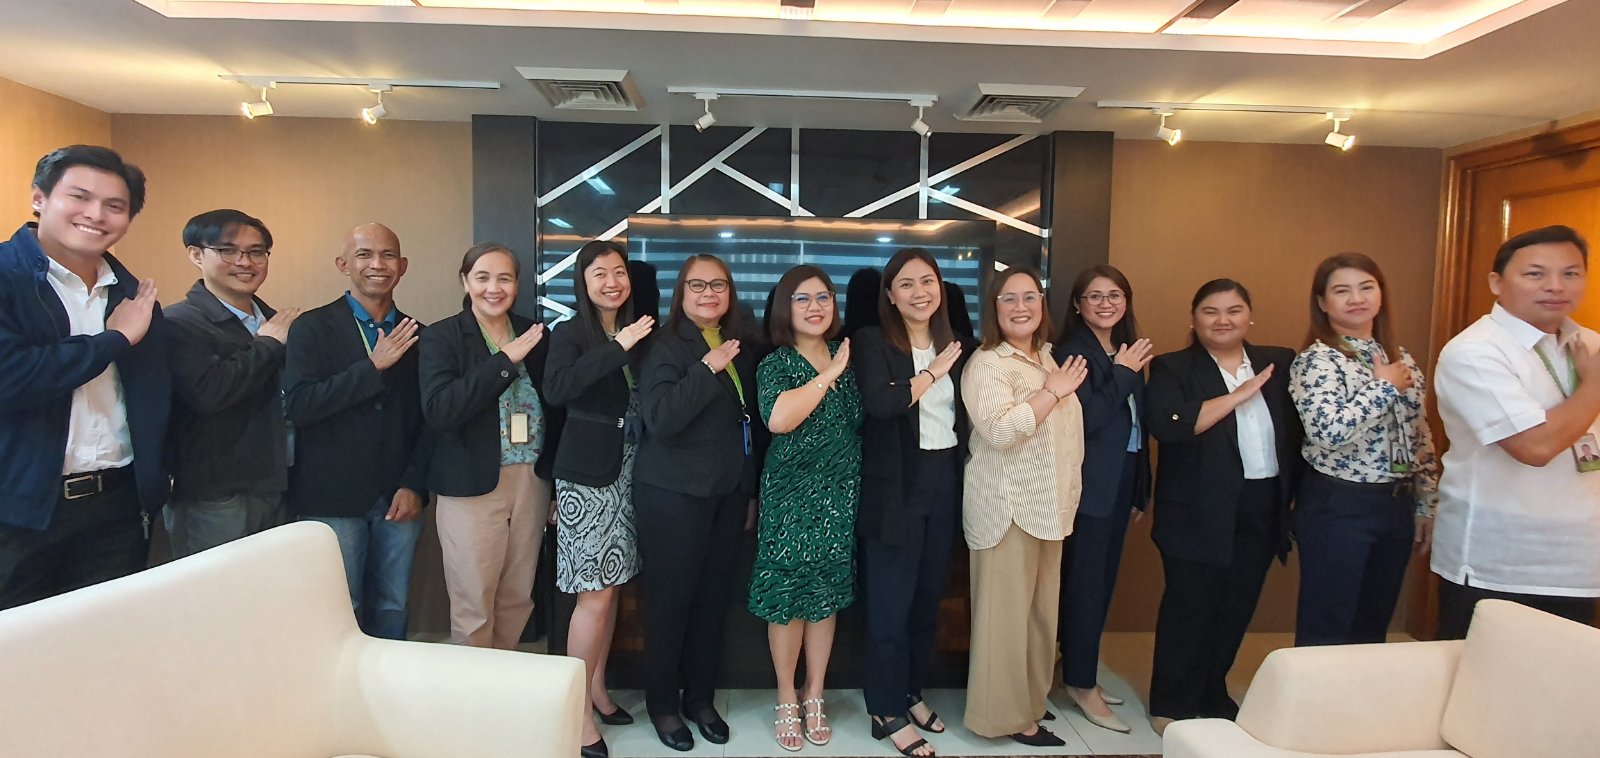 At Your Service: Executives and Officers of the Palawan Group of Companies and Philippine Veterans Bank  commit to providing excellent service for their customers